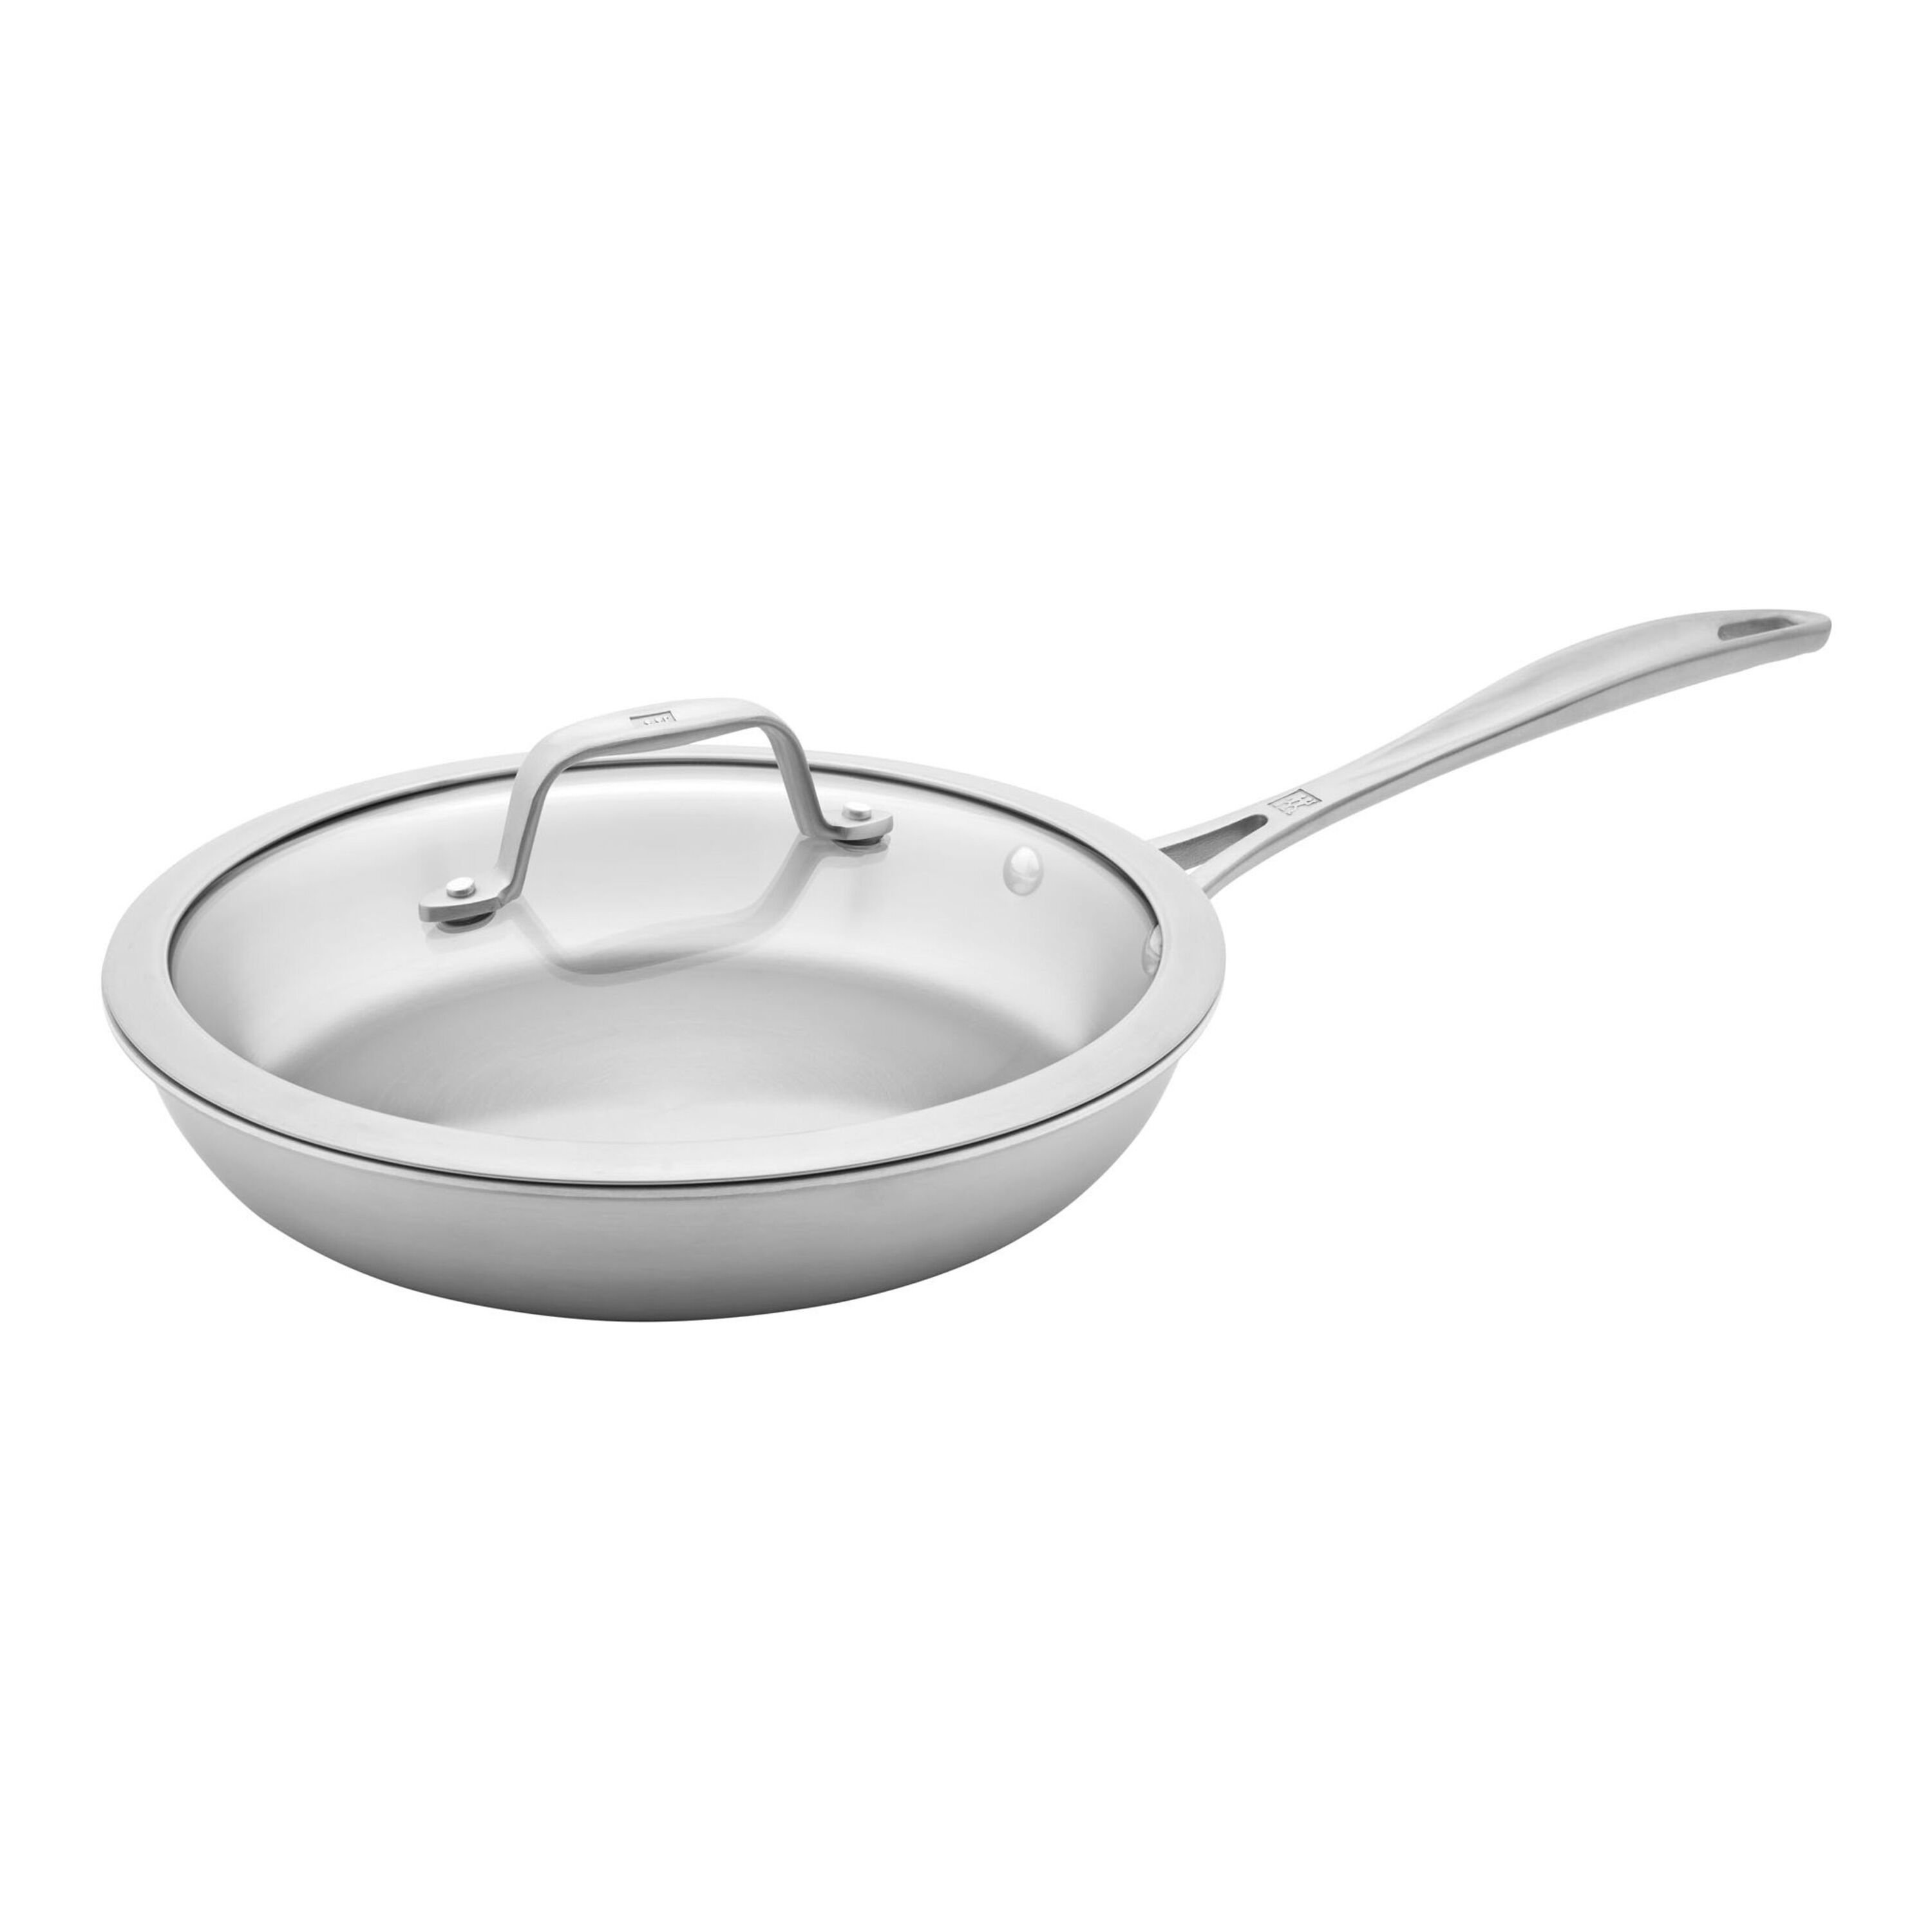 ZWILLING Spirit Ceramic Nonstick Fry Pan with Lid, 9.5-inch, Stainless Steel